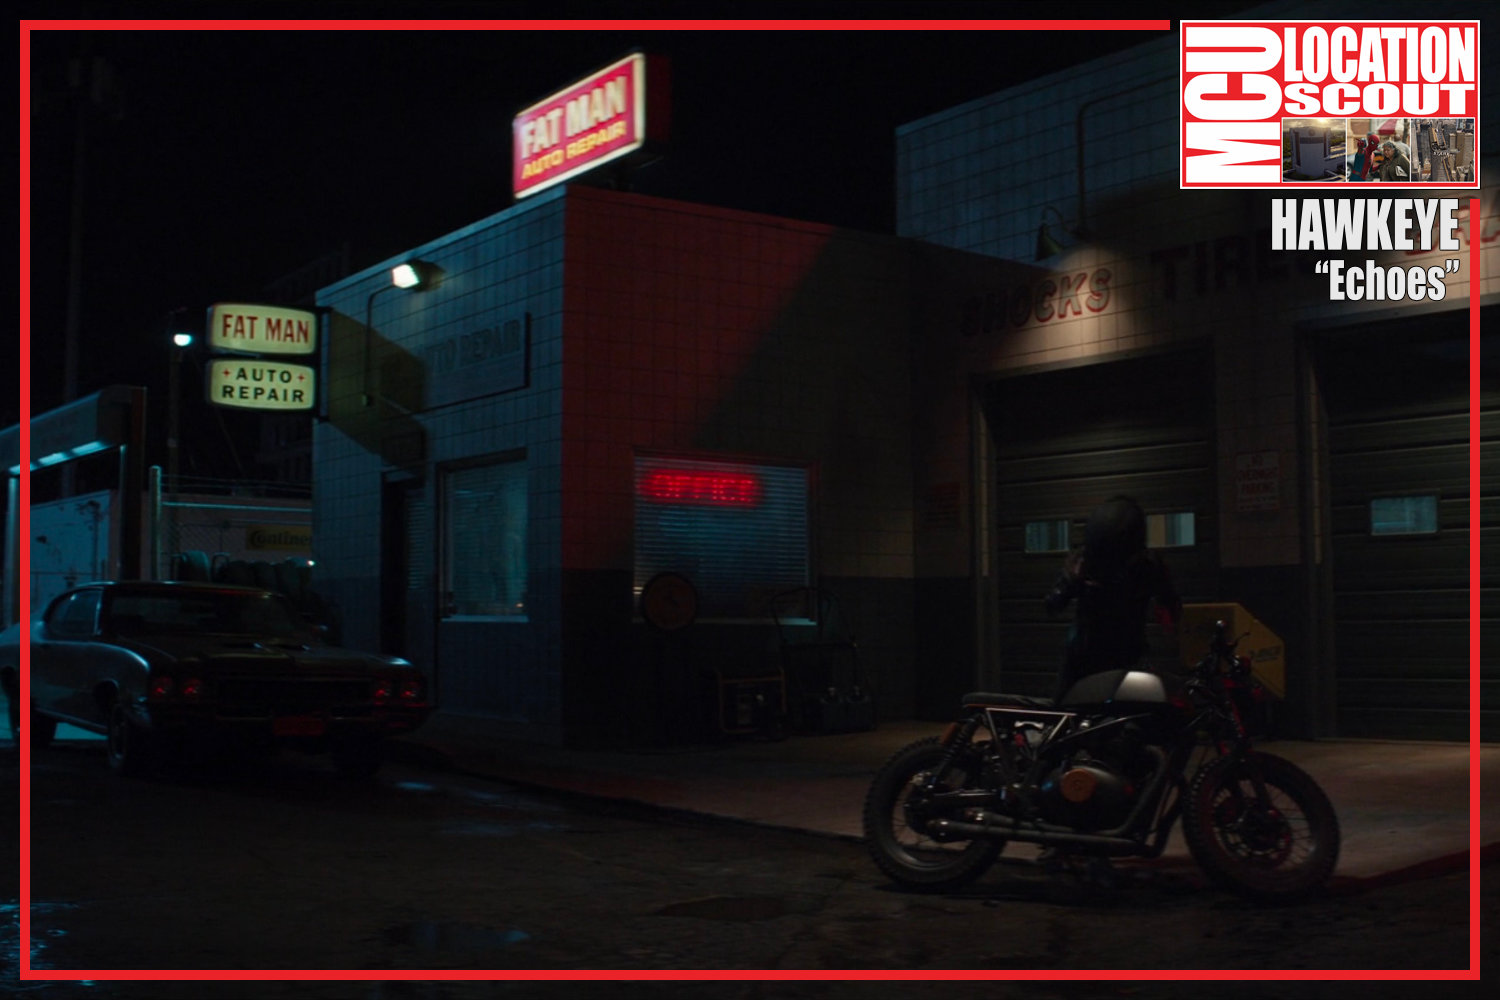 MCU: Location Scout | Fat Man Auto Repair and Used Cars